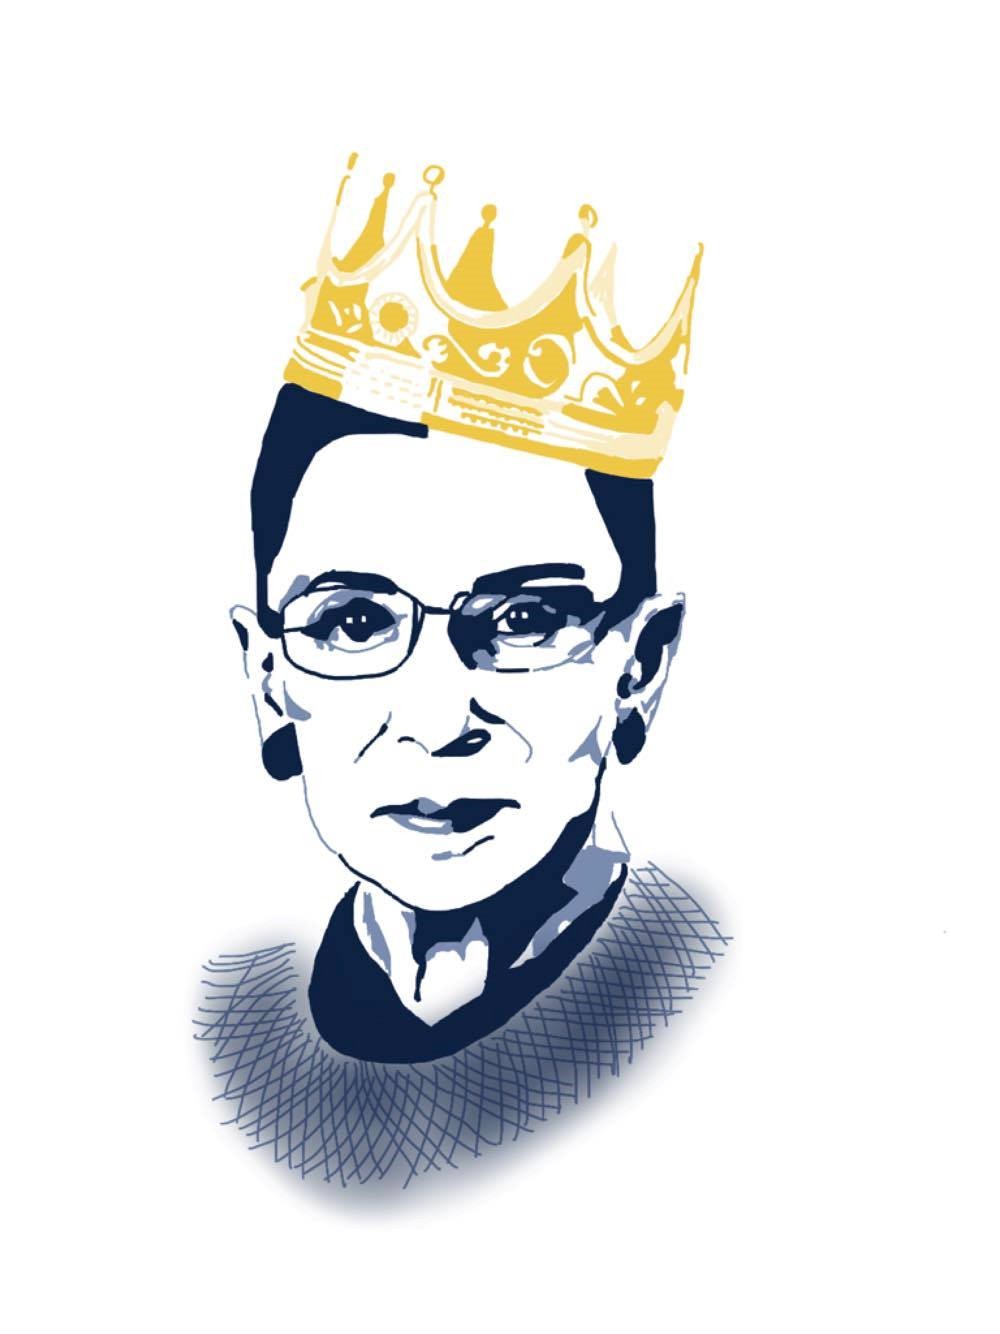 [Feb. 2017 Arts] Ruth Bader Ginsburg’s autobiography reveals the mundane side of American politics